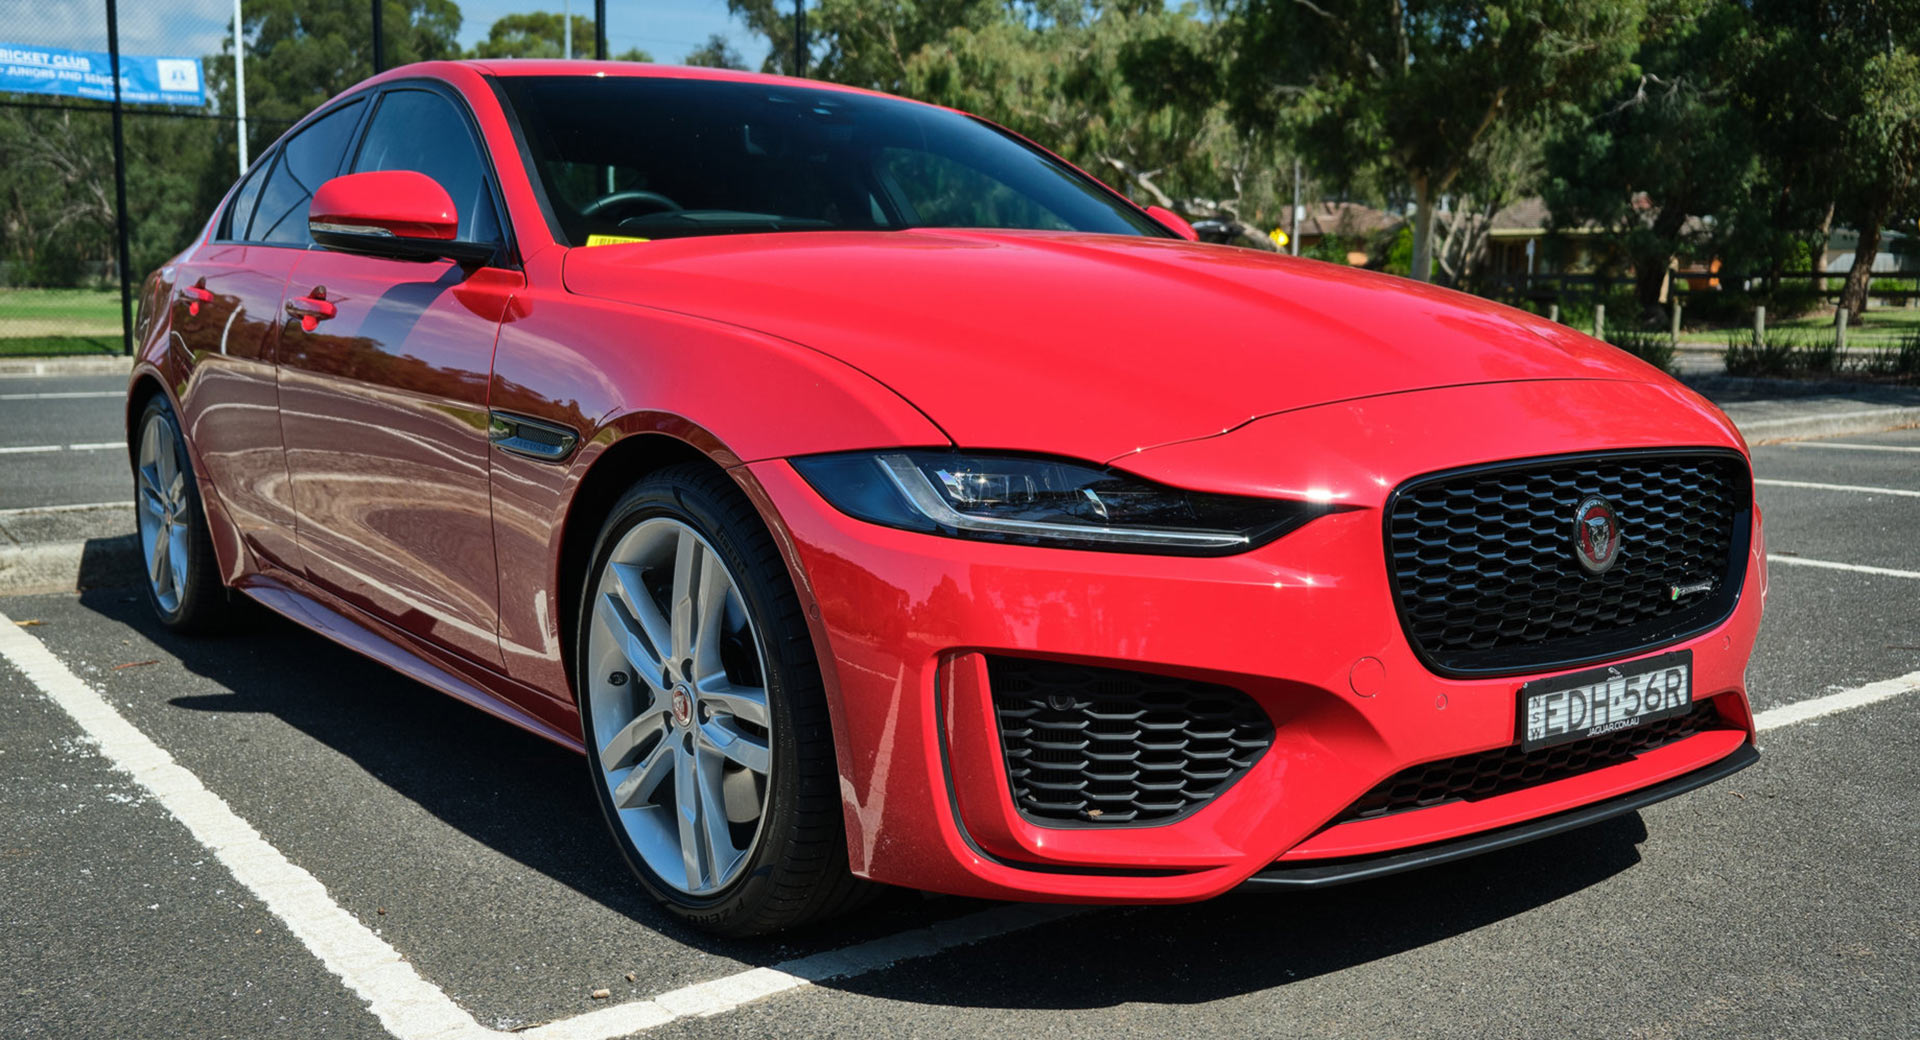 2021 Jaguar XE pricing and specs detailed: Surprise changes as BMW